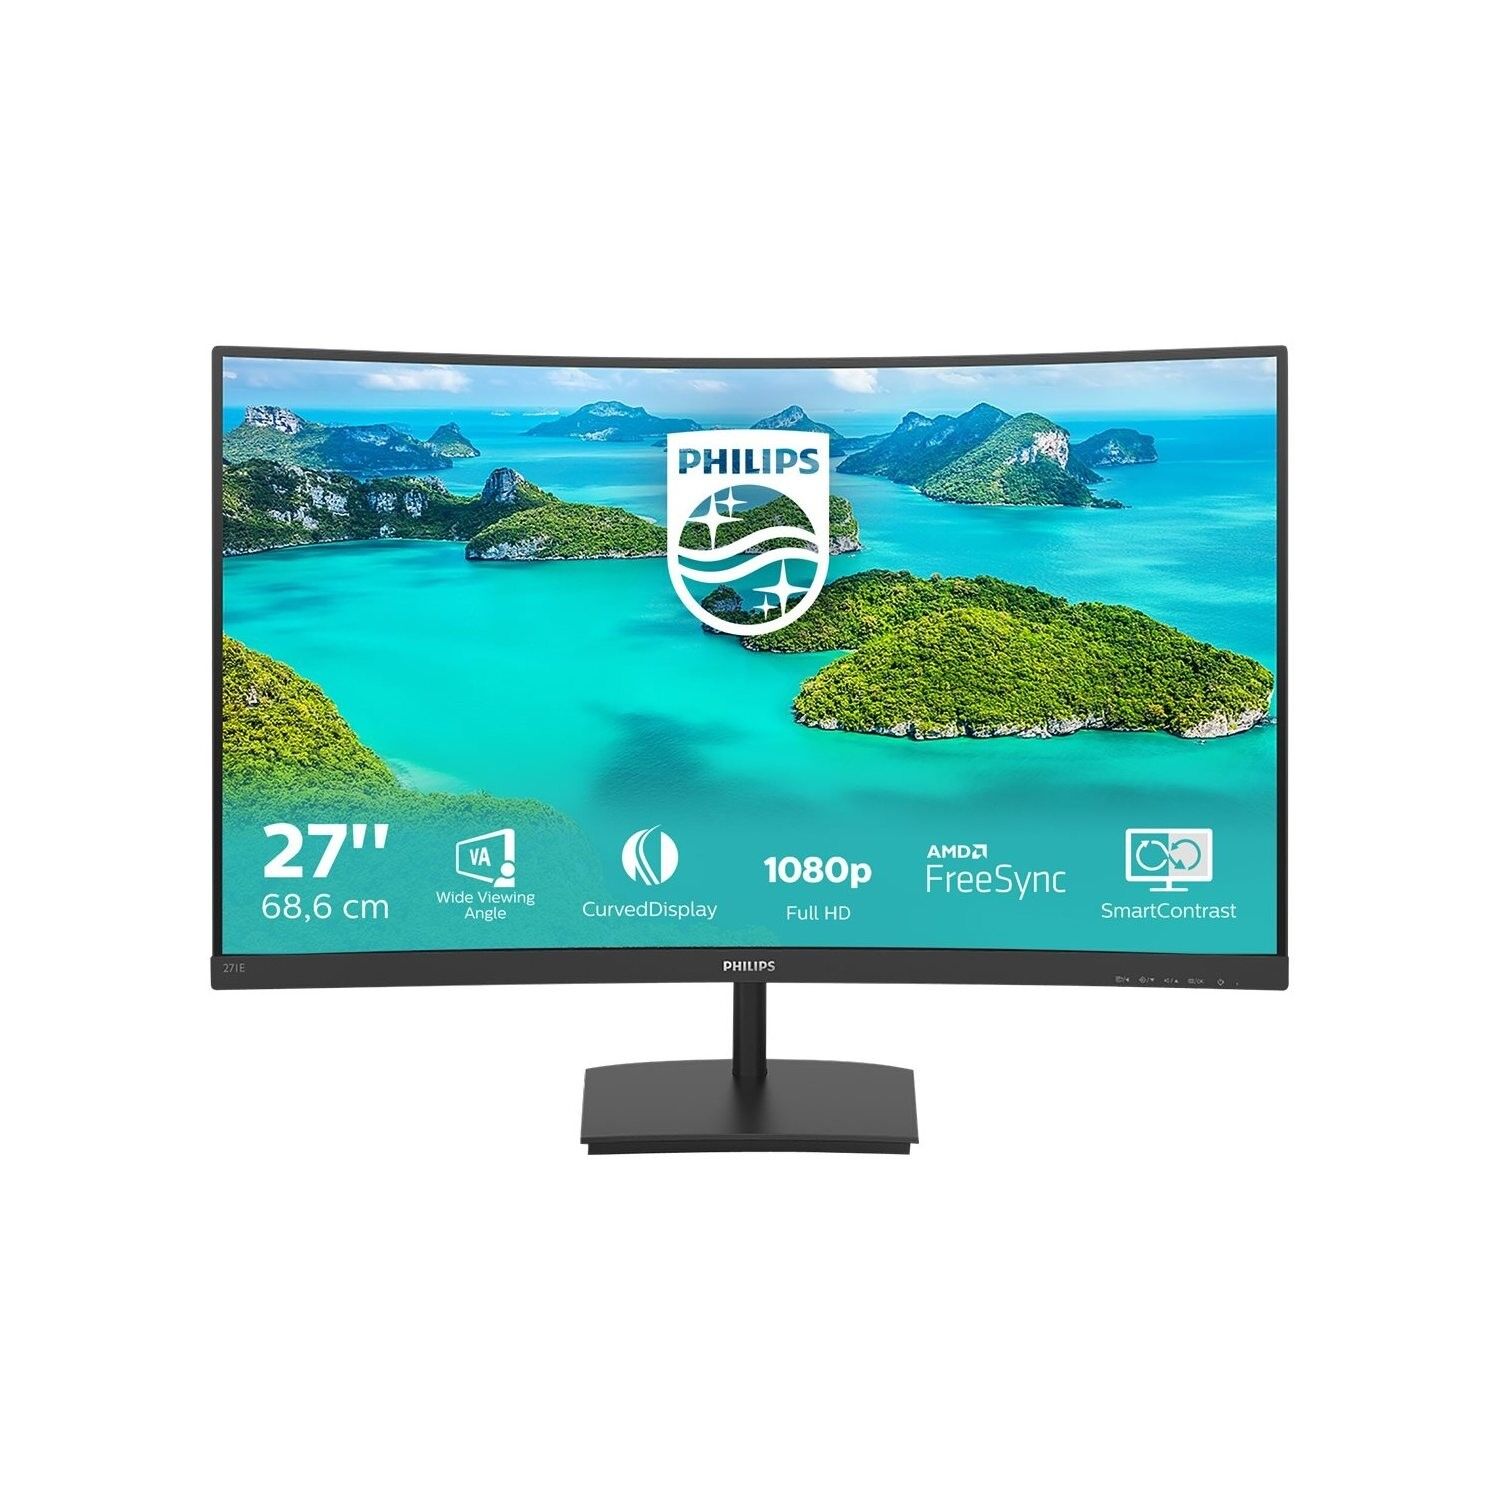 Philips E-Line 27 Full HD Curved Monitor